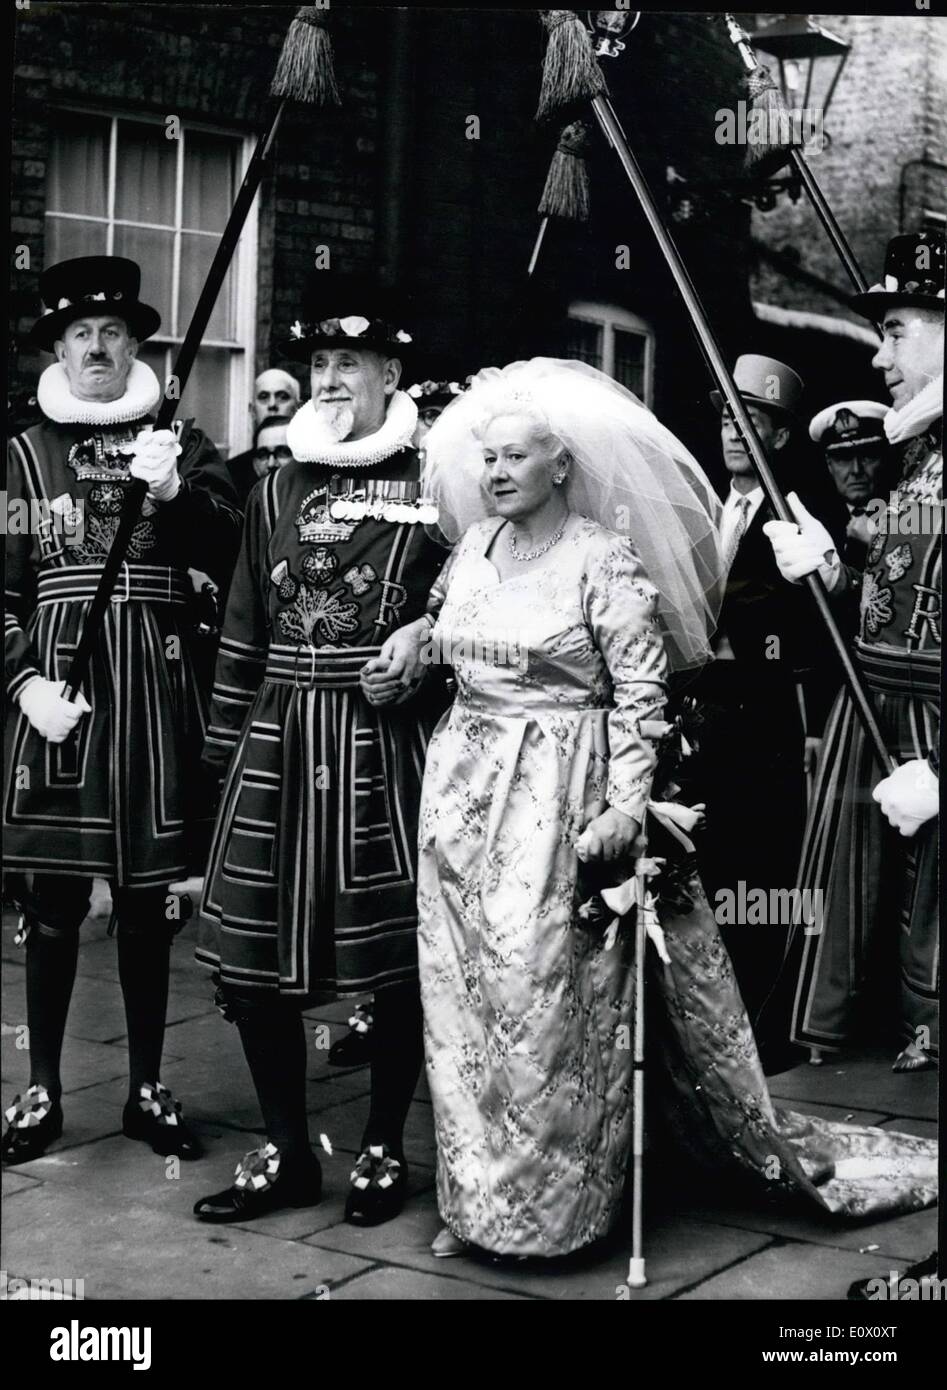 Nov. 11, 1964 - Wedding Bells for the Merryman and his maid.Unusual wedding at the tower of London Chapel.: A very colorful wedding took place yesterday at the Tower Chapel in the Tower of London - between Yeoman Warder Gilbert Futter (59) and Maureen Strove-Williams. All the colleagues for Warder Futter turned out was the Sunday best uniforms. Gilbert Futter was the first ''Beefeater'' to marry in the Tower Chapel for 16 years. The couple met when Maureen was guide to a party of tourists at the Tower Stock Photo